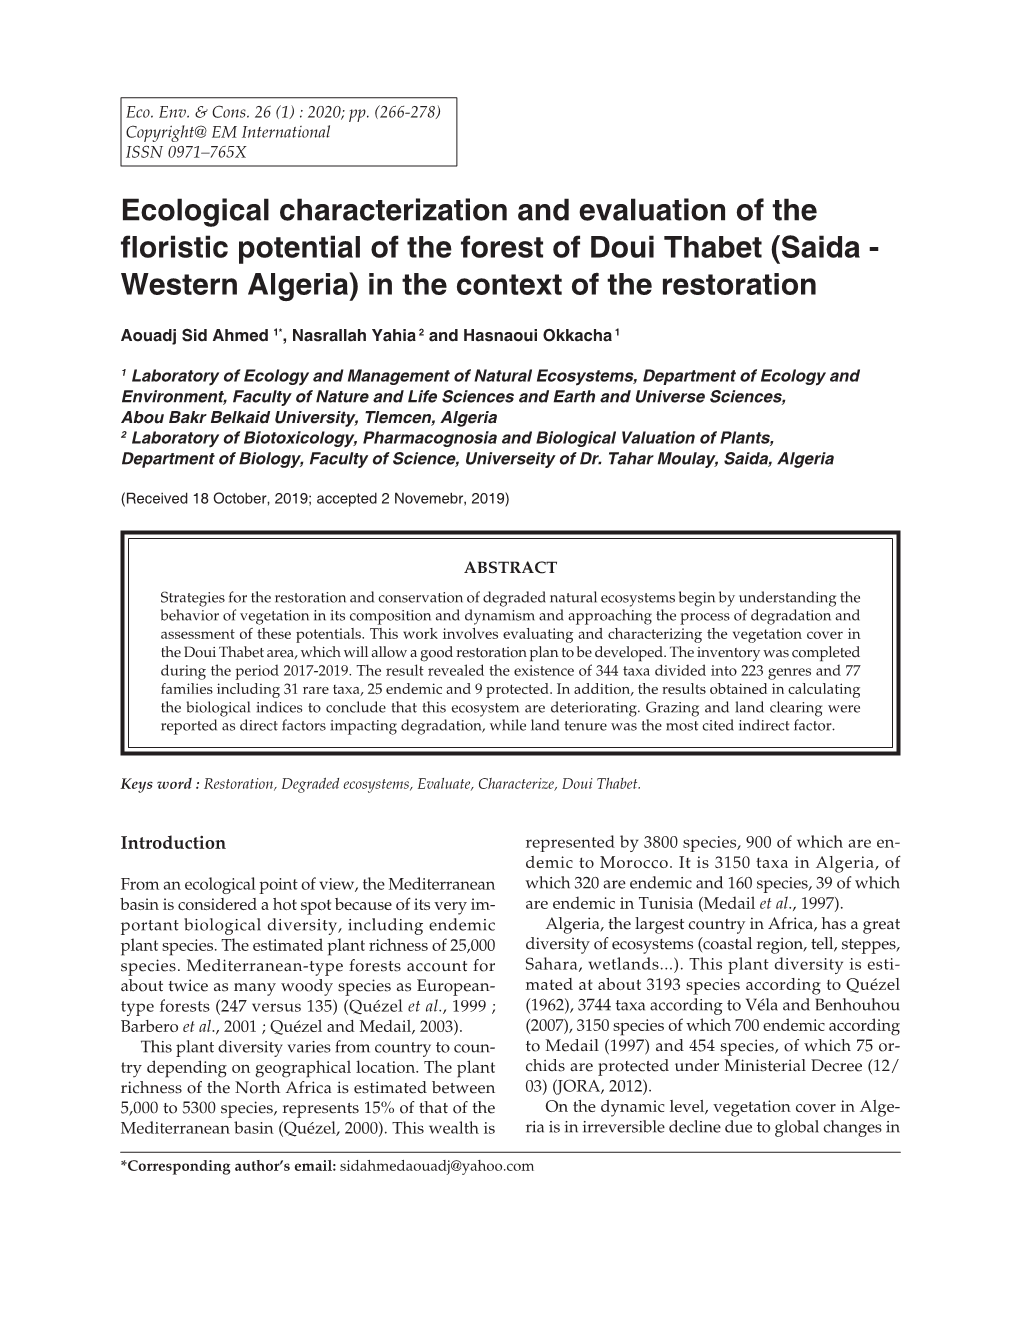 Ecological Characterization and Evaluation of the Floristic Potential of the Forest of Doui Thabet (Saida - Western Algeria) in the Context of the Restoration